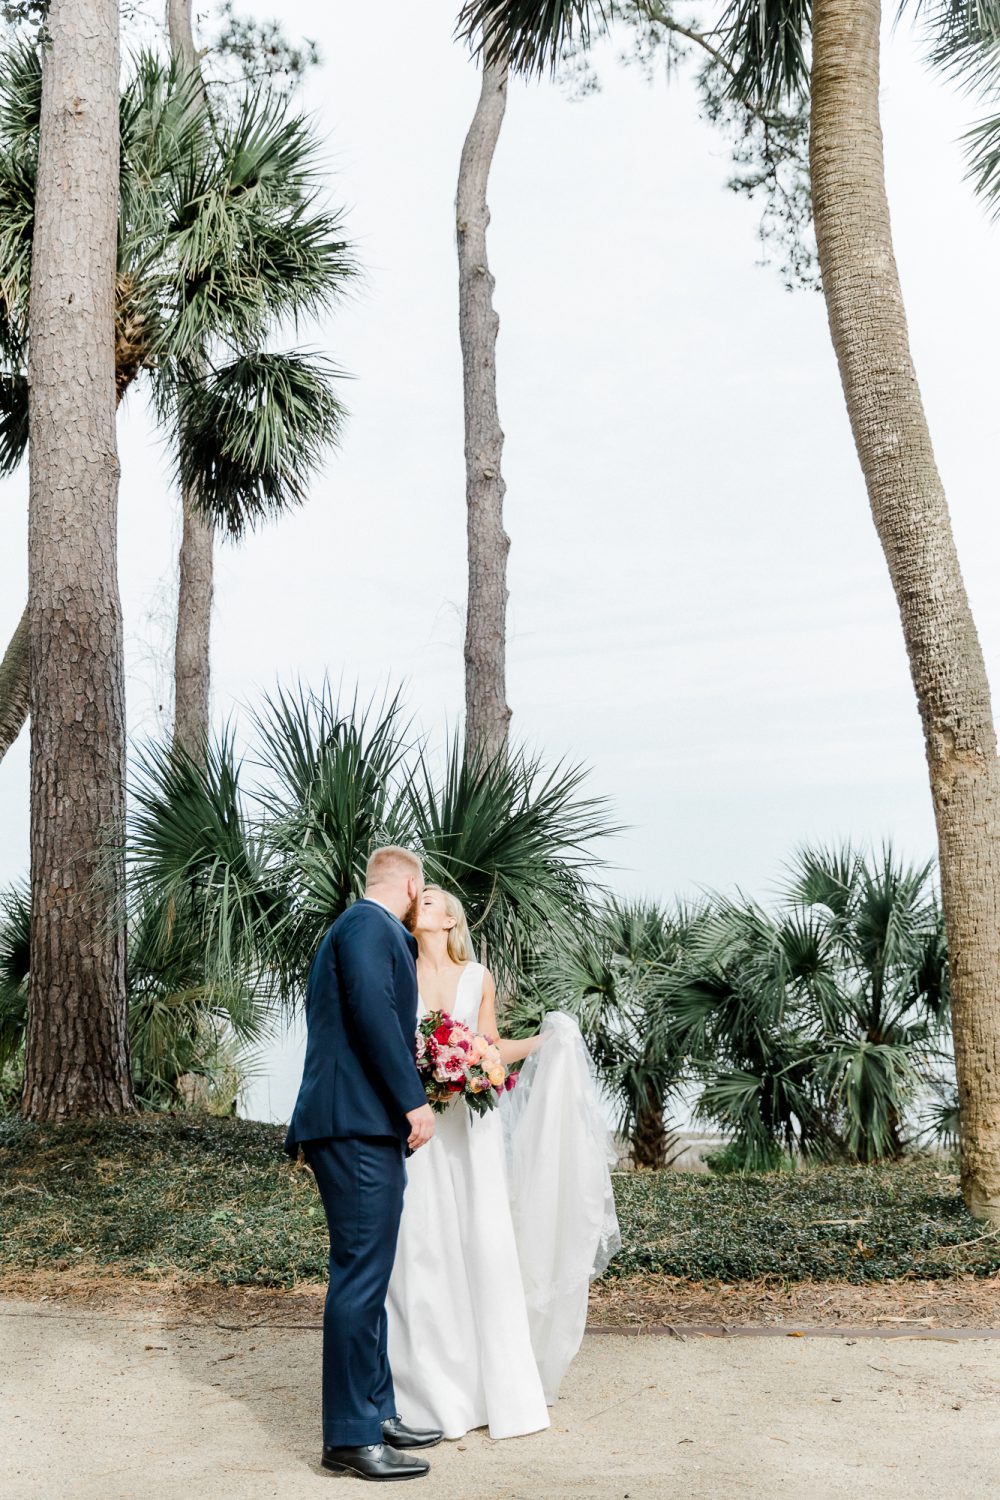 A southern, happy, pink wedding at the Montage Palmetto Bluff in South Carolina.